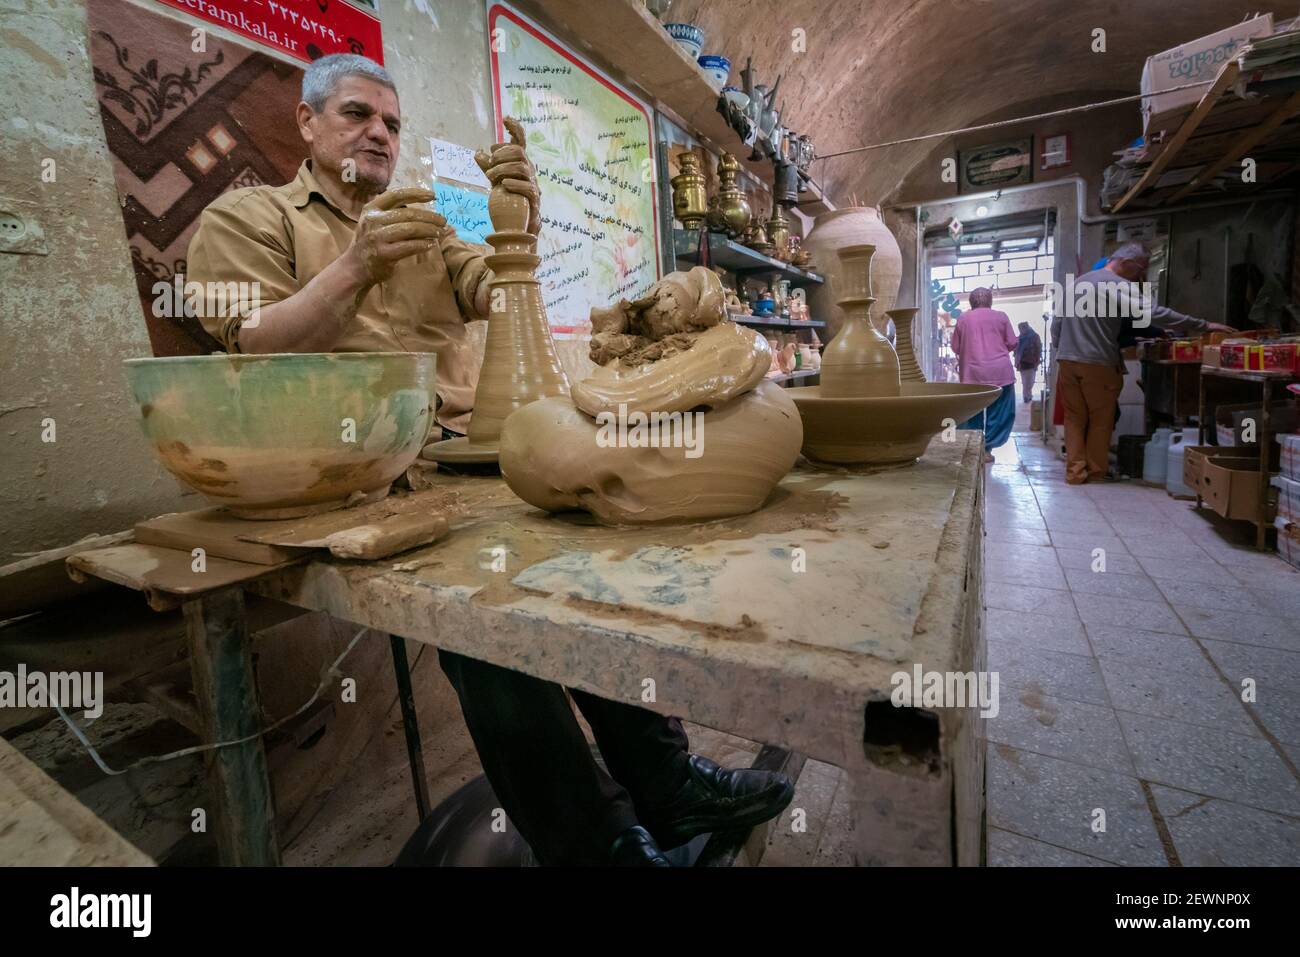 Meybod, Iran - 14.04.2019: Potter working with clay in his pottery shop in Iran. Stock Photo